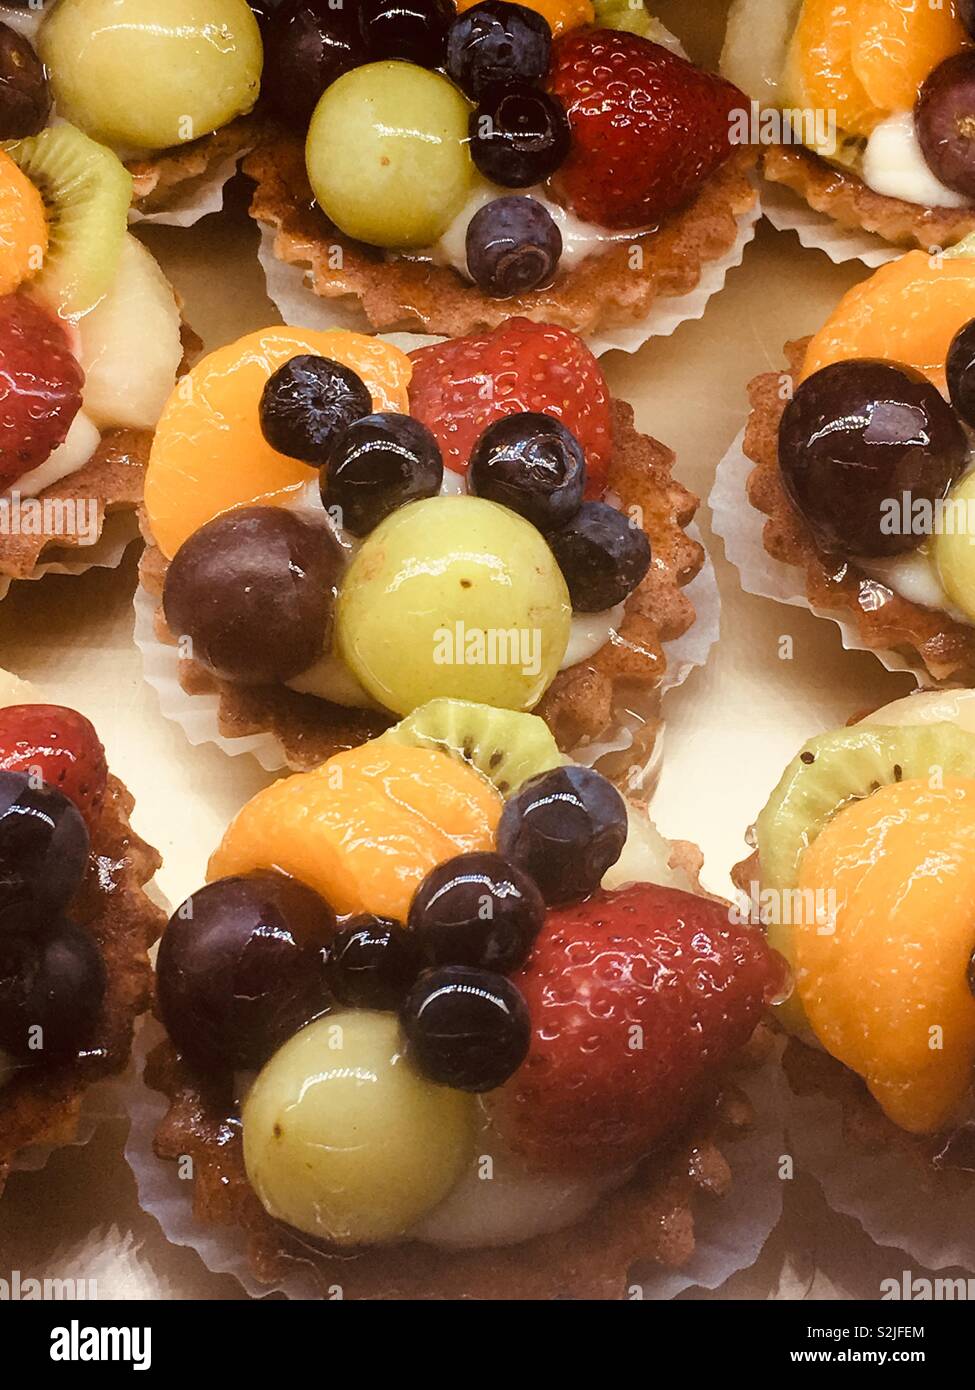 Mouth watering delicious tasty treats professionally prepared fruit tarts including blueberries, kiwi, purple and green grapes, orange, and strawberries. Stock Photo